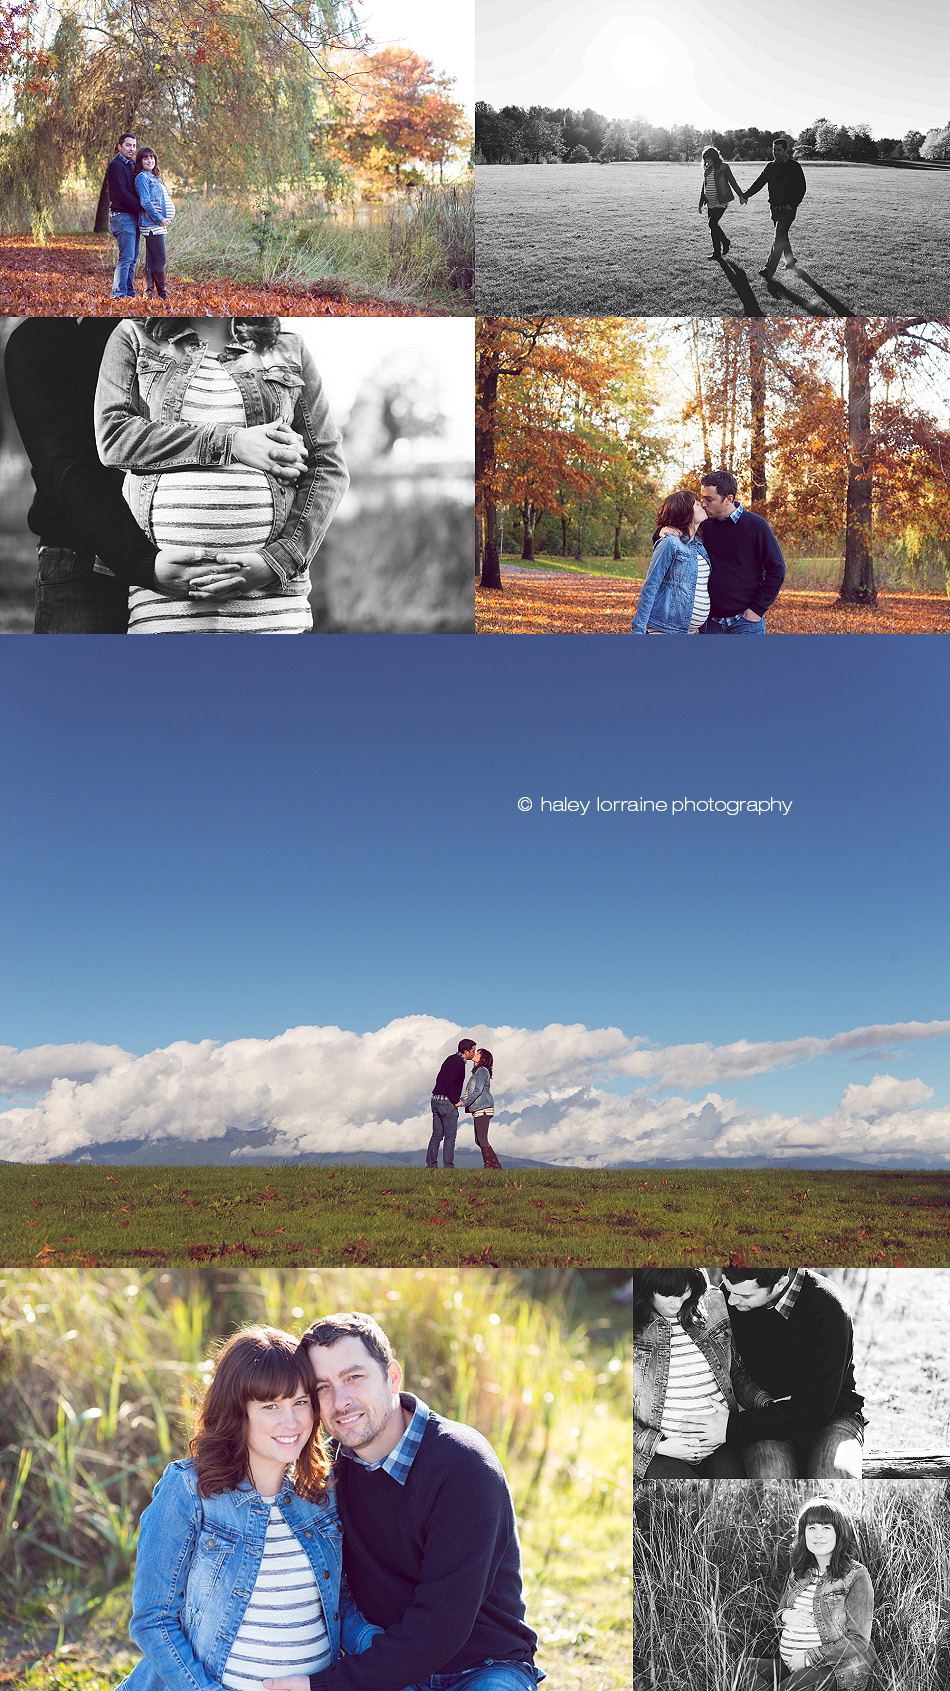 Maternity and Newborn Photography Vancouver